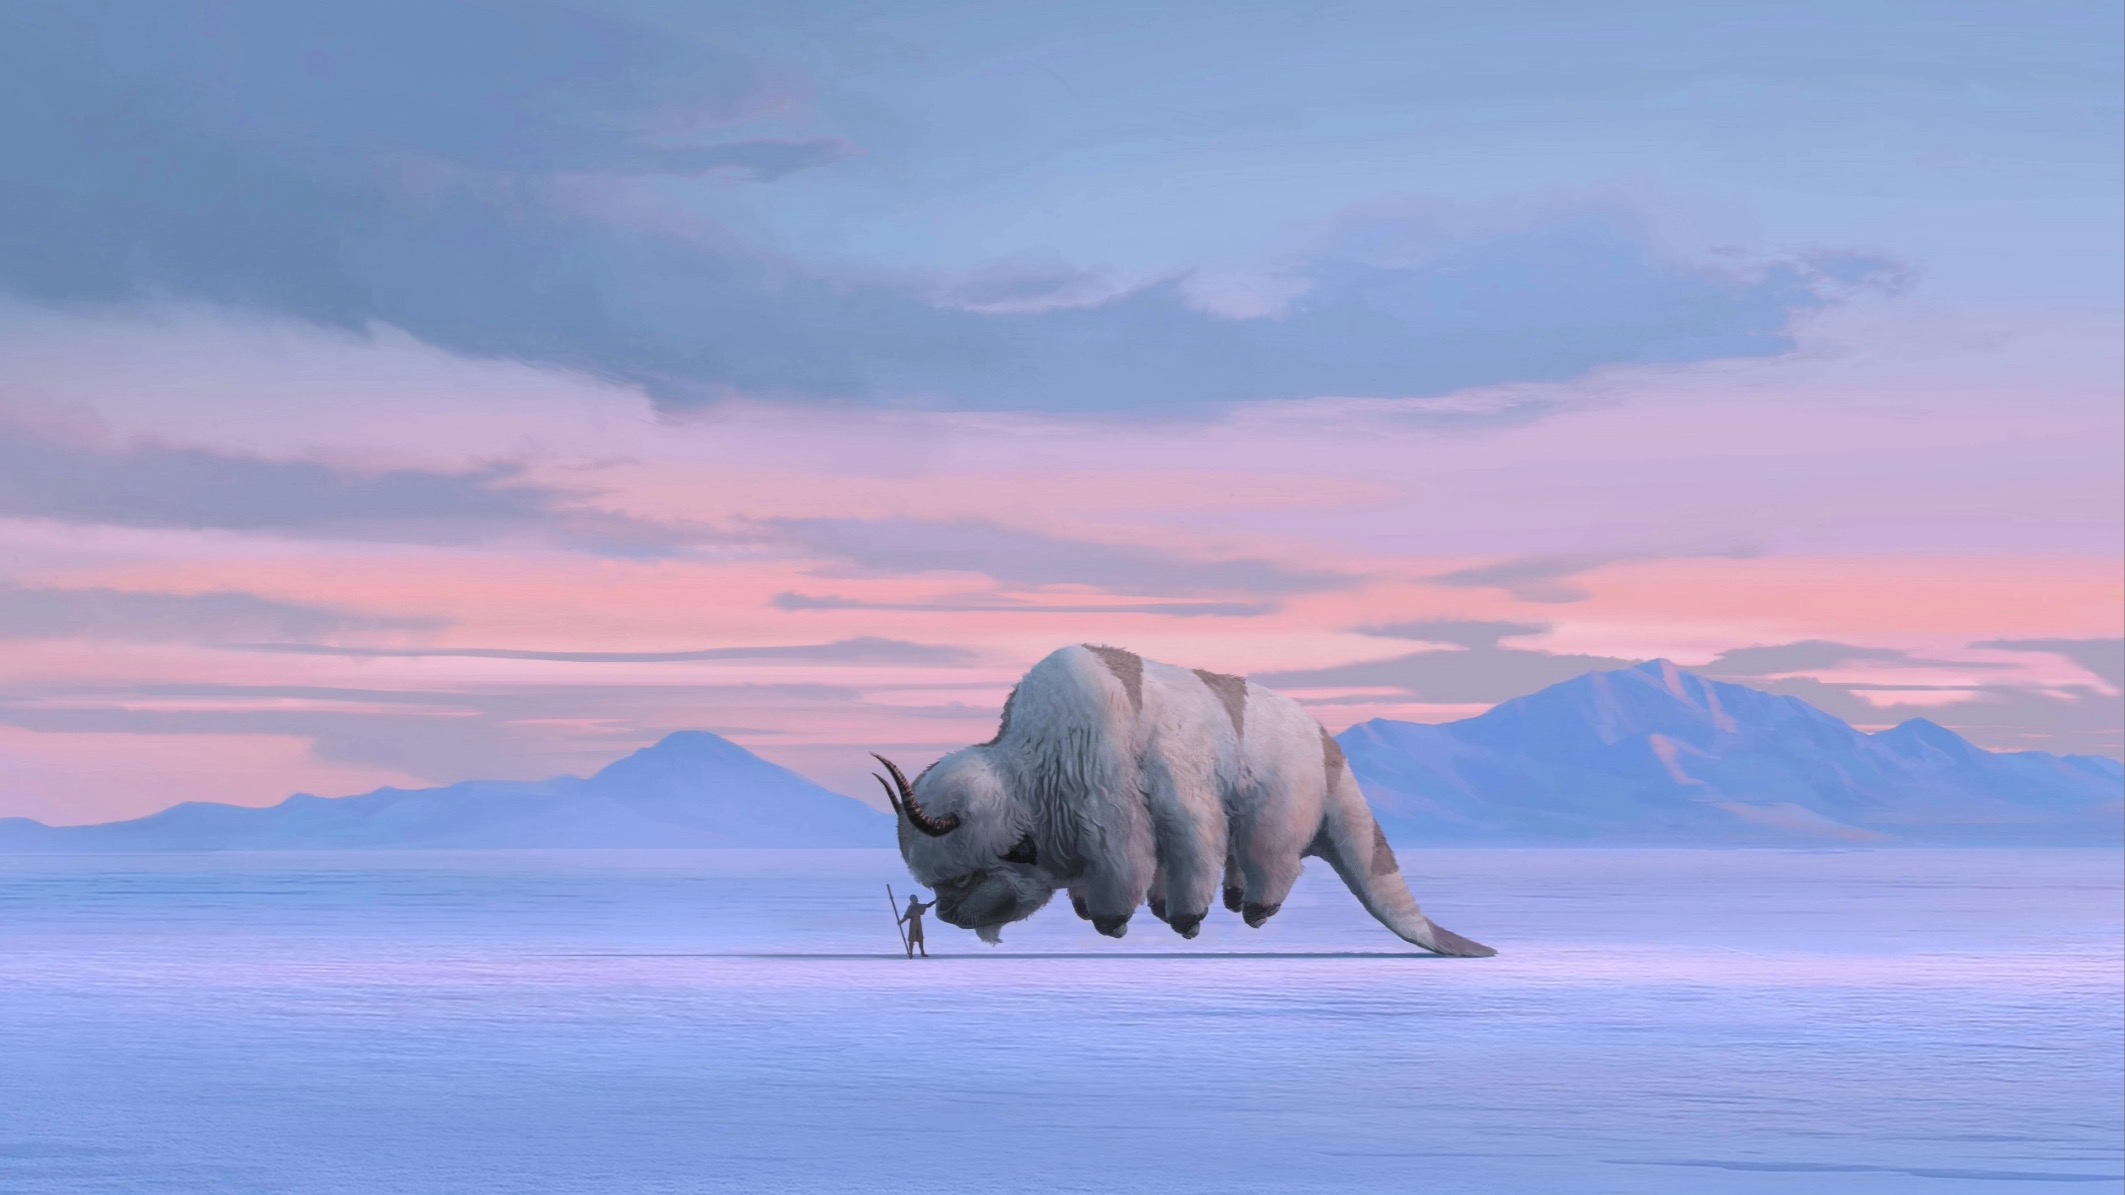 a watercolor-esque image of Aang petting his skybison Appa; the pair are set against a mountainrange during what looks to be a sunrise of pale blues and pinks